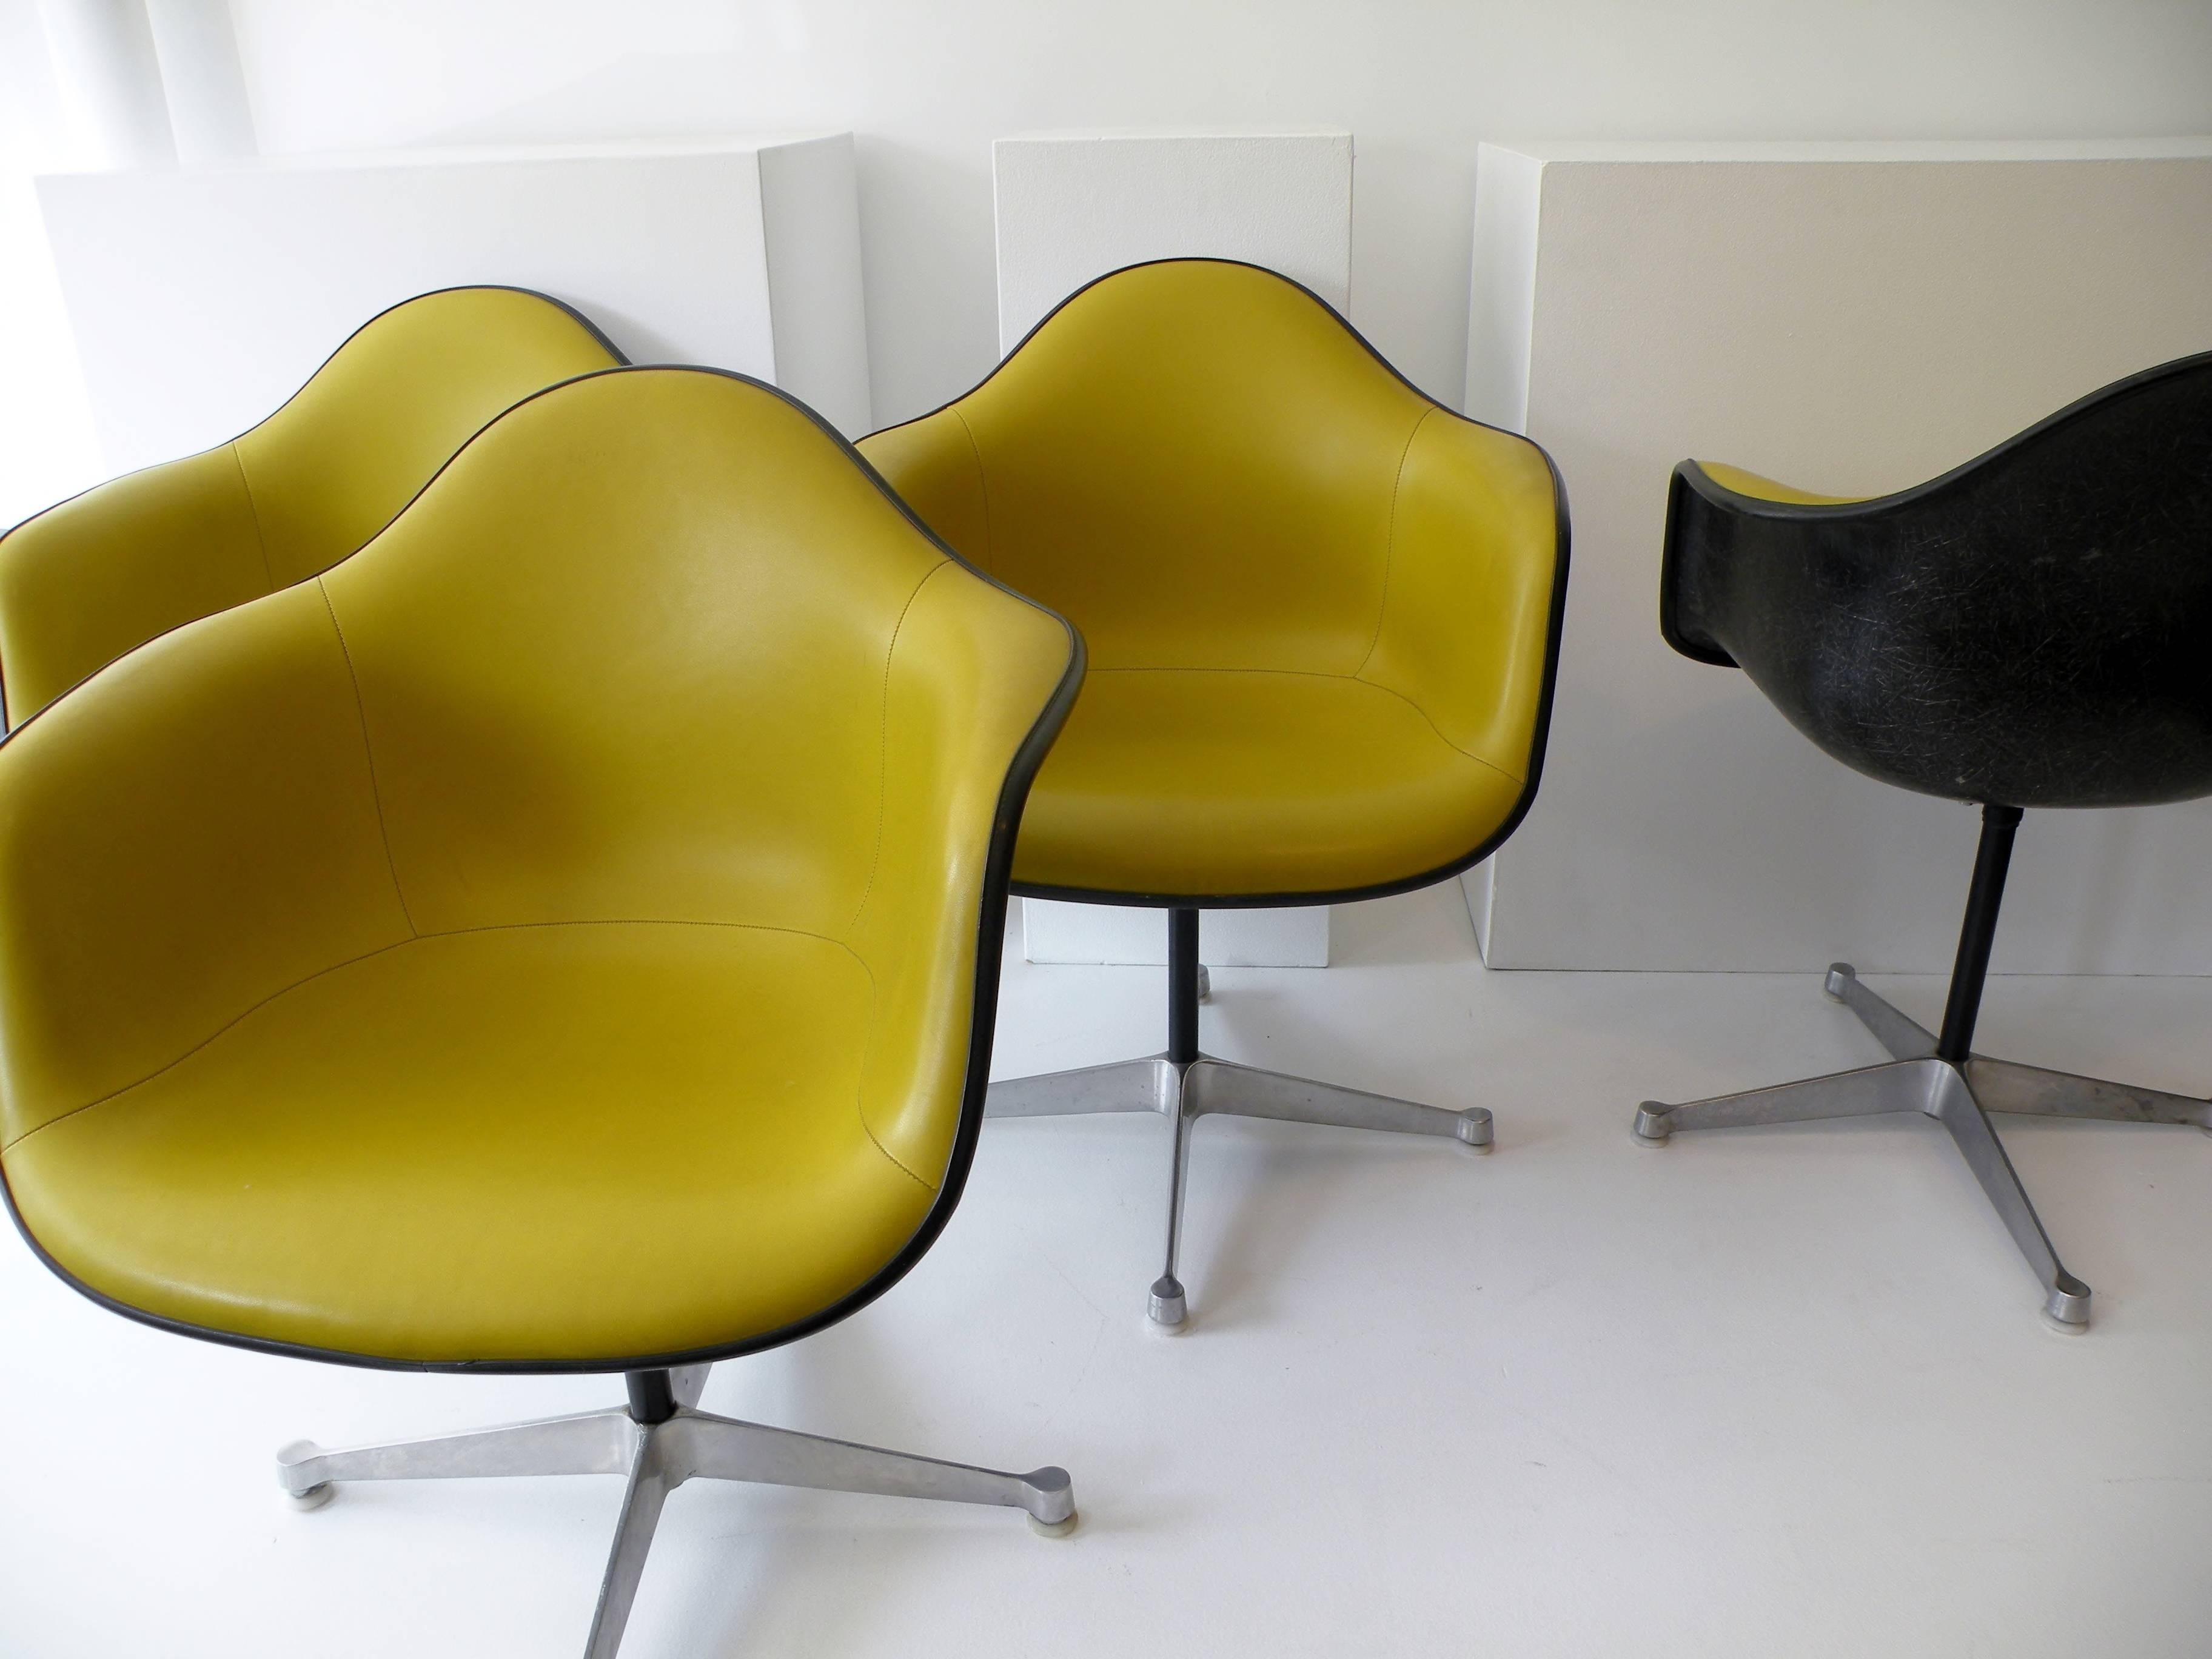 Set of four Aluminum Group armchairs black fiberglass shells showing pronounced fibers to surface, striking contrasting chartreuse vinyl seat covers, on four point bases. Designed by renowned Charles and Ray Eames for Herman Miller, these examples